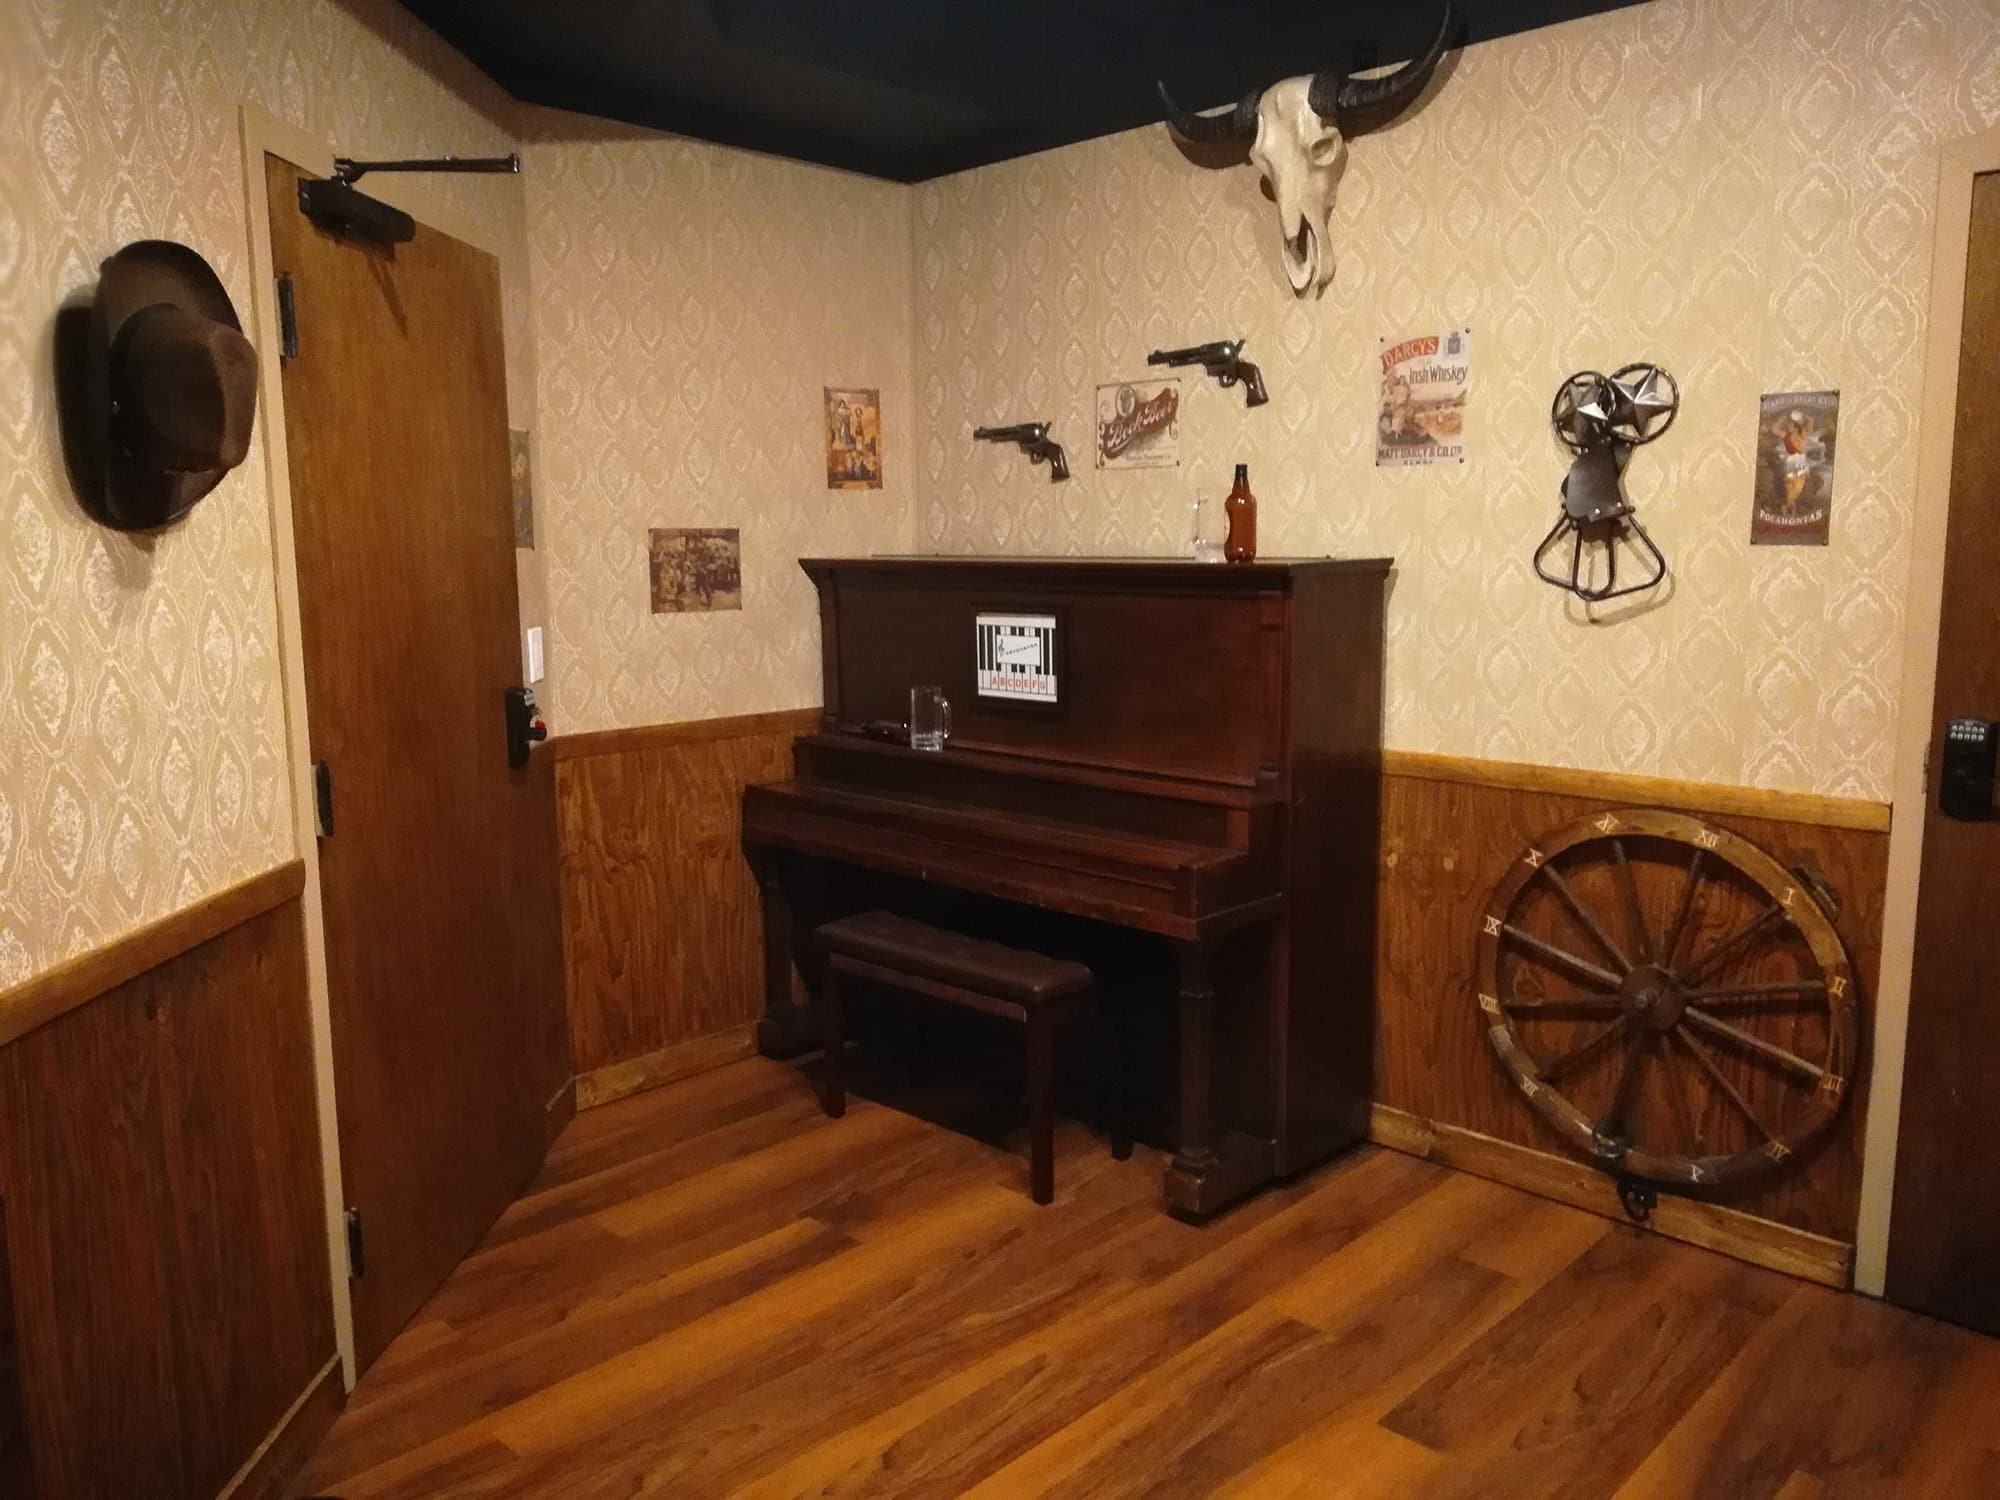 Arizona Shootout room with upright piano, wagon wheel and hanging skull at Escapology Escape Rooms in Lakeland, FL